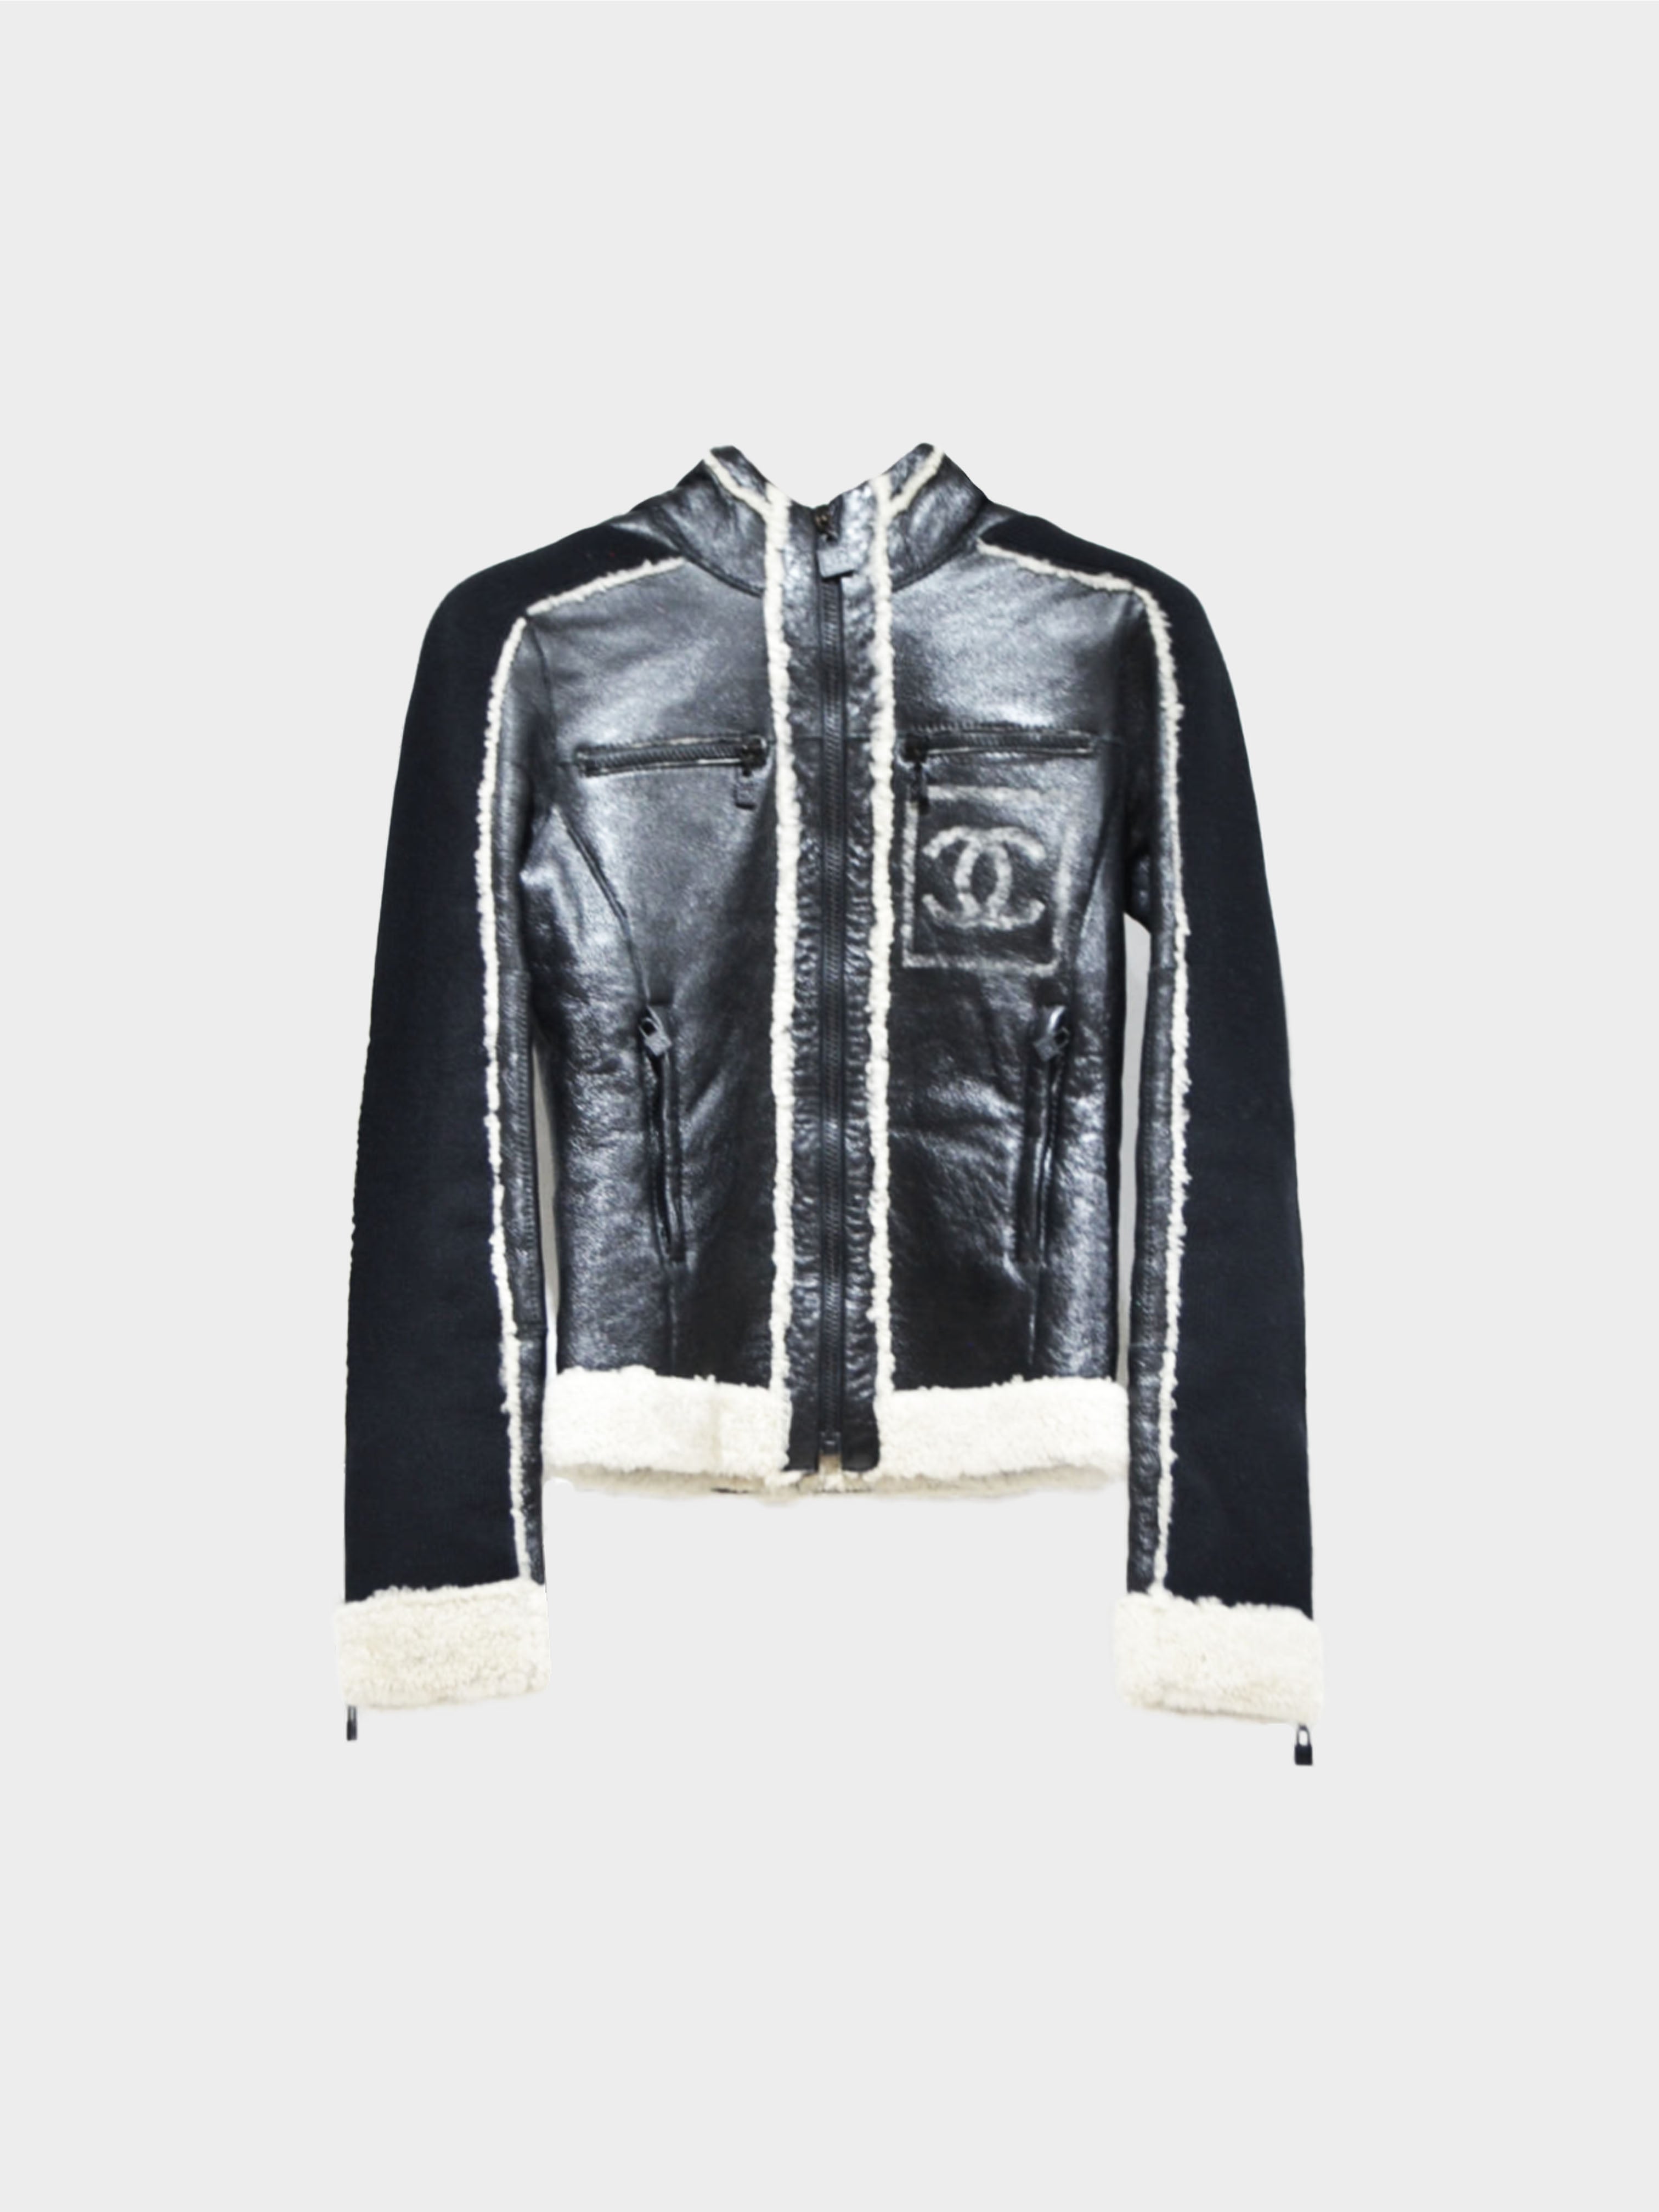 Chanel Fall 2008 Vintage Sport CC Zip Up Hooded Jacket